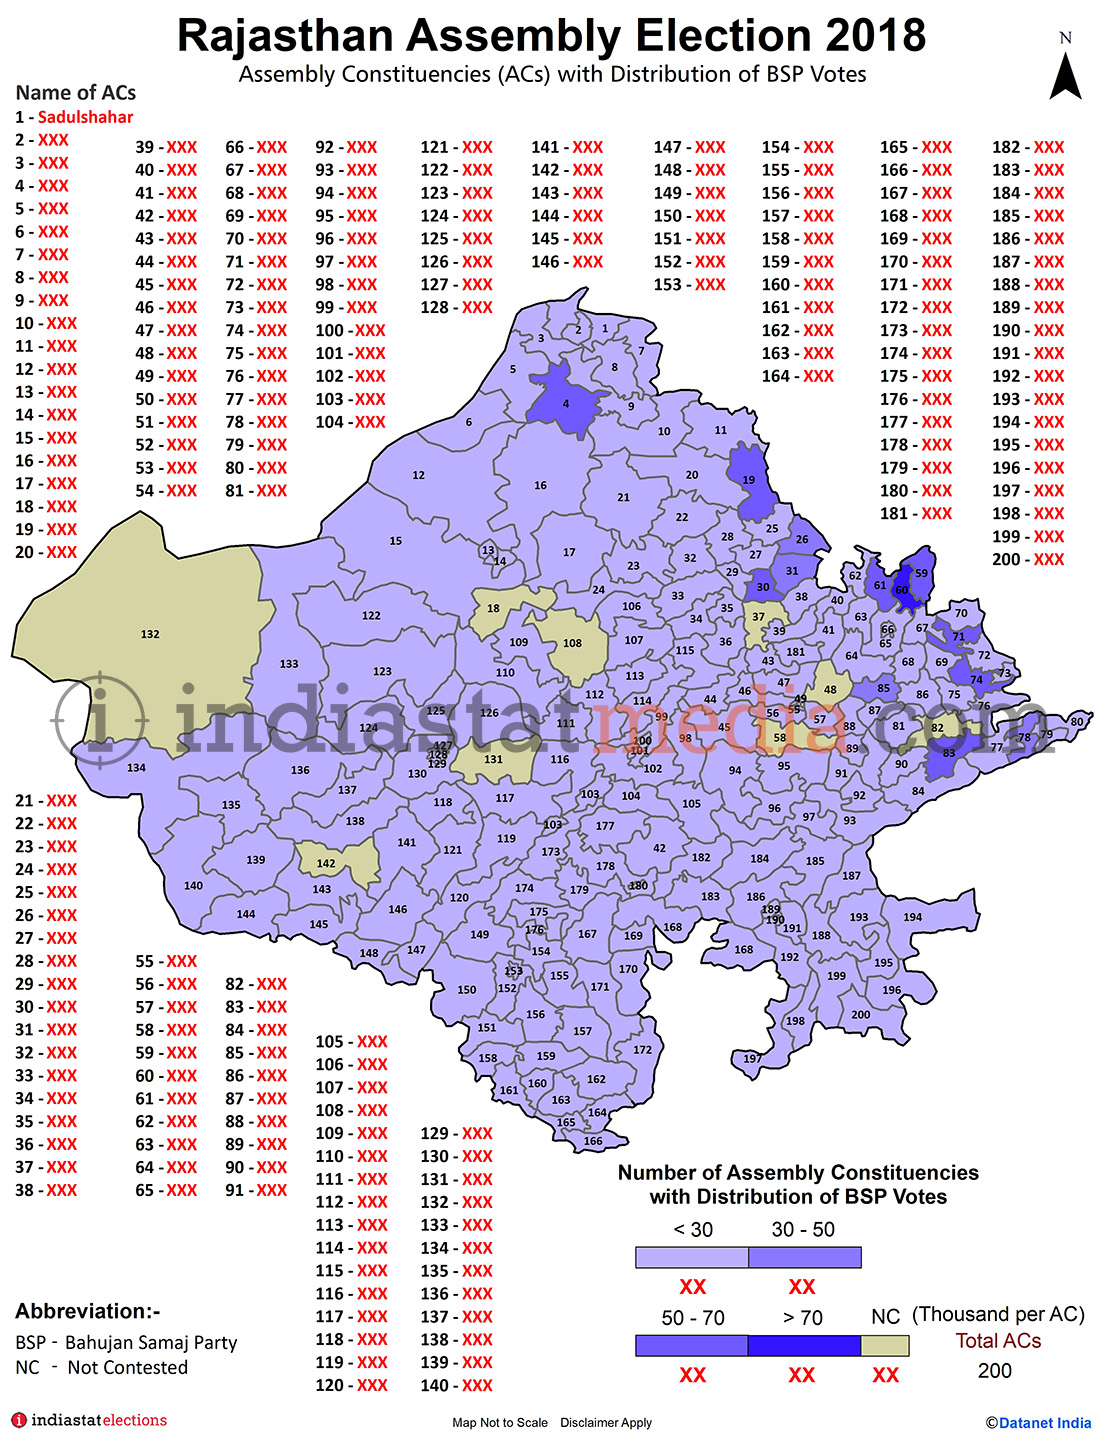 Distribution of BSP Votes by Constituencies in Rajasthan (Assembly Election - 2018)